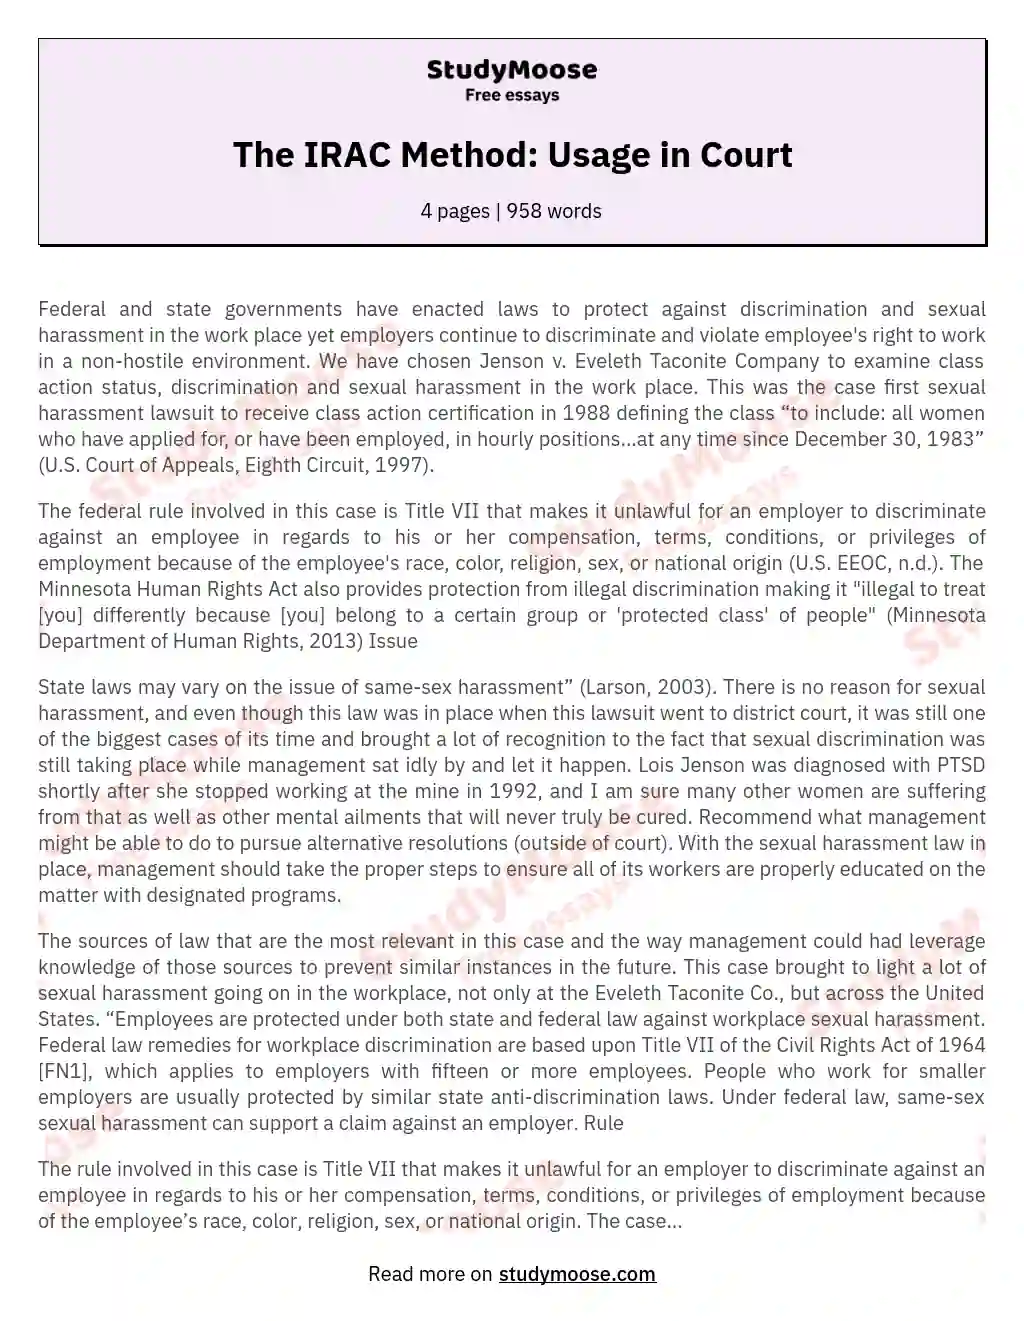 The IRAC Method: Usage in Court essay